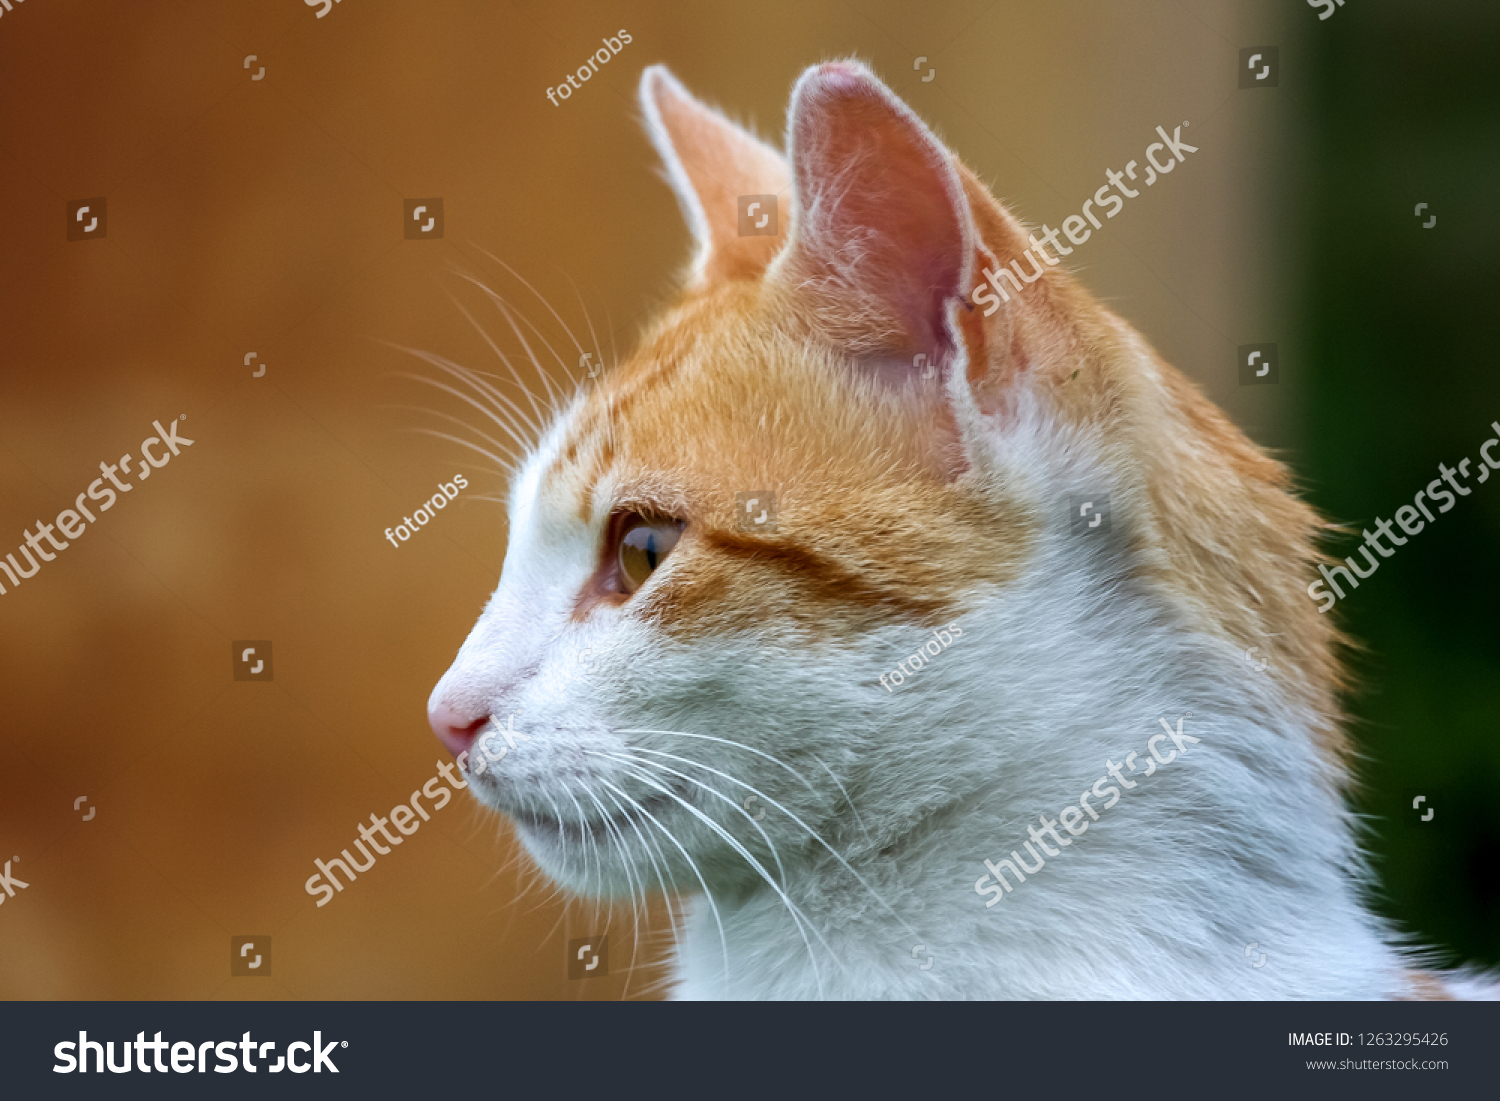 Cute red white cat portrait on nature blurred background.  Portrait of white ginger cat. Cat is small domesticated carnivorous mammal with soft fur. #1263295426